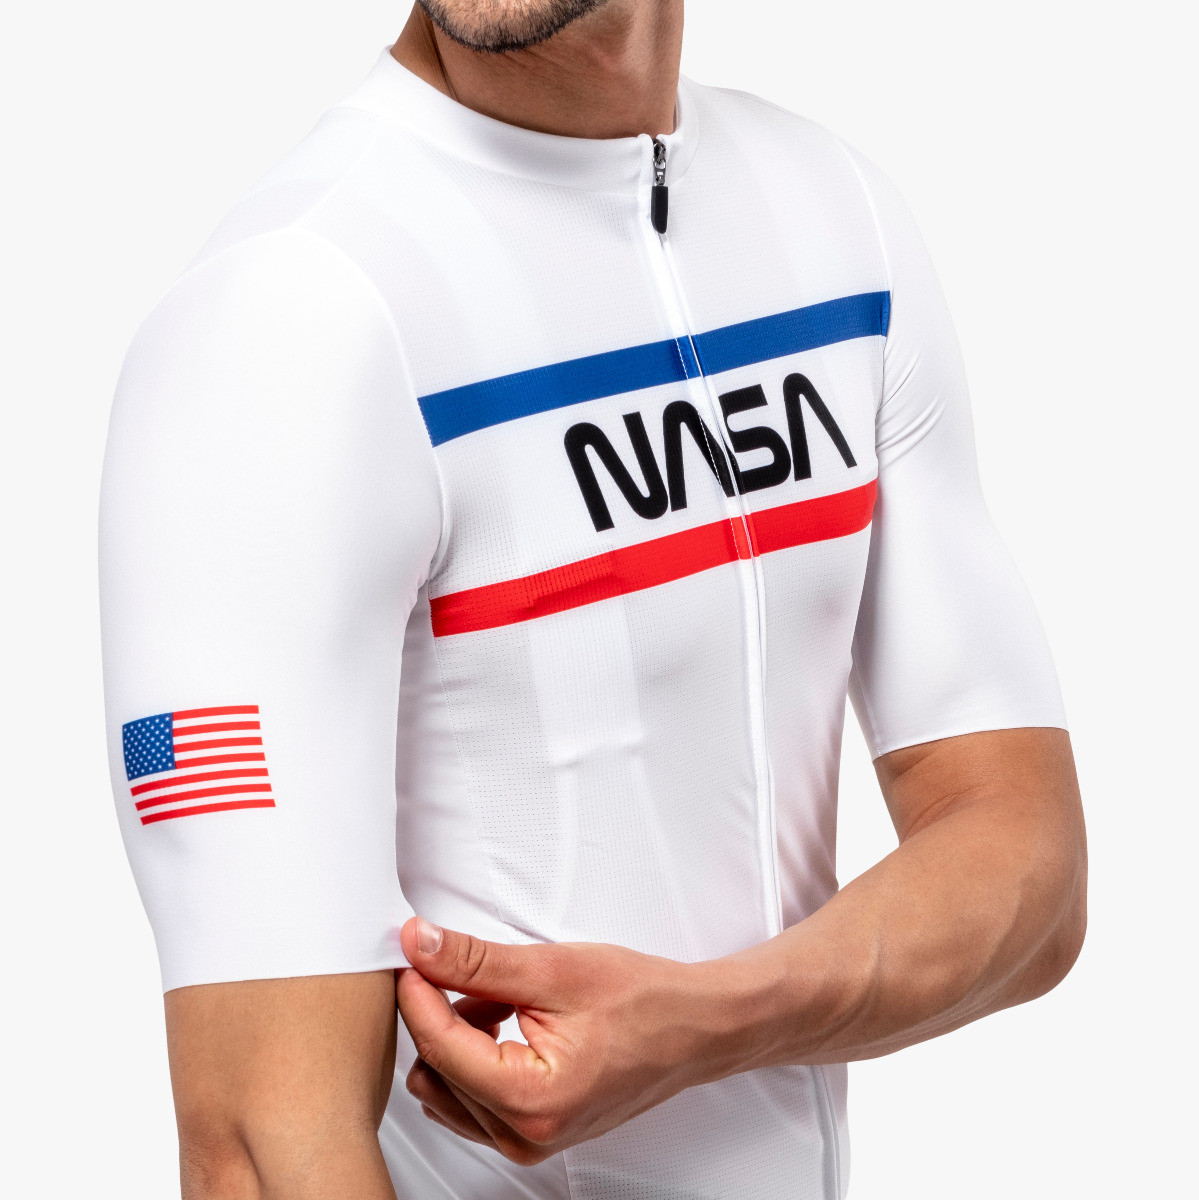 scicon space agency cycling clothing jersey nasa 05